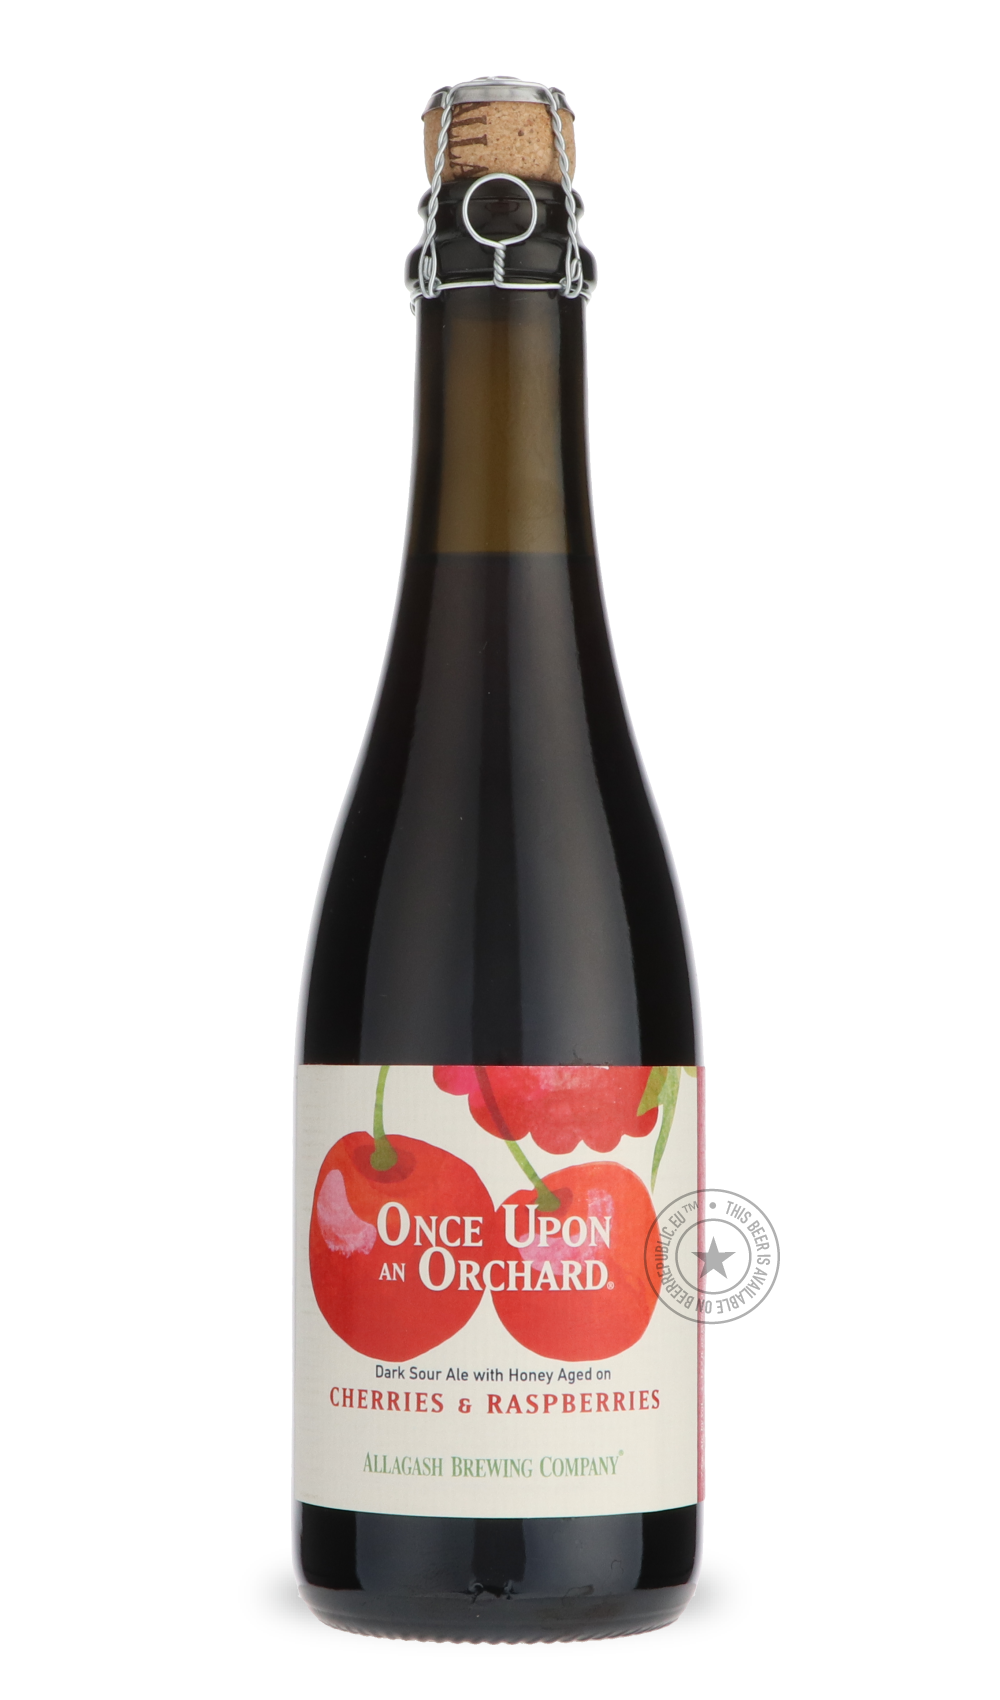 -Allagash- Once Upon An Orchard - Cherries & Raspberries-Sour / Wild & Fruity- Only @ Beer Republic - The best online beer store for American & Canadian craft beer - Buy beer online from the USA and Canada - Bier online kopen - Amerikaans bier kopen - Craft beer store - Craft beer kopen - Amerikanisch bier kaufen - Bier online kaufen - Acheter biere online - IPA - Stout - Porter - New England IPA - Hazy IPA - Imperial Stout - Barrel Aged - Barrel Aged Imperial Stout - Brown - Dark beer - Blond - Blonde - Pi